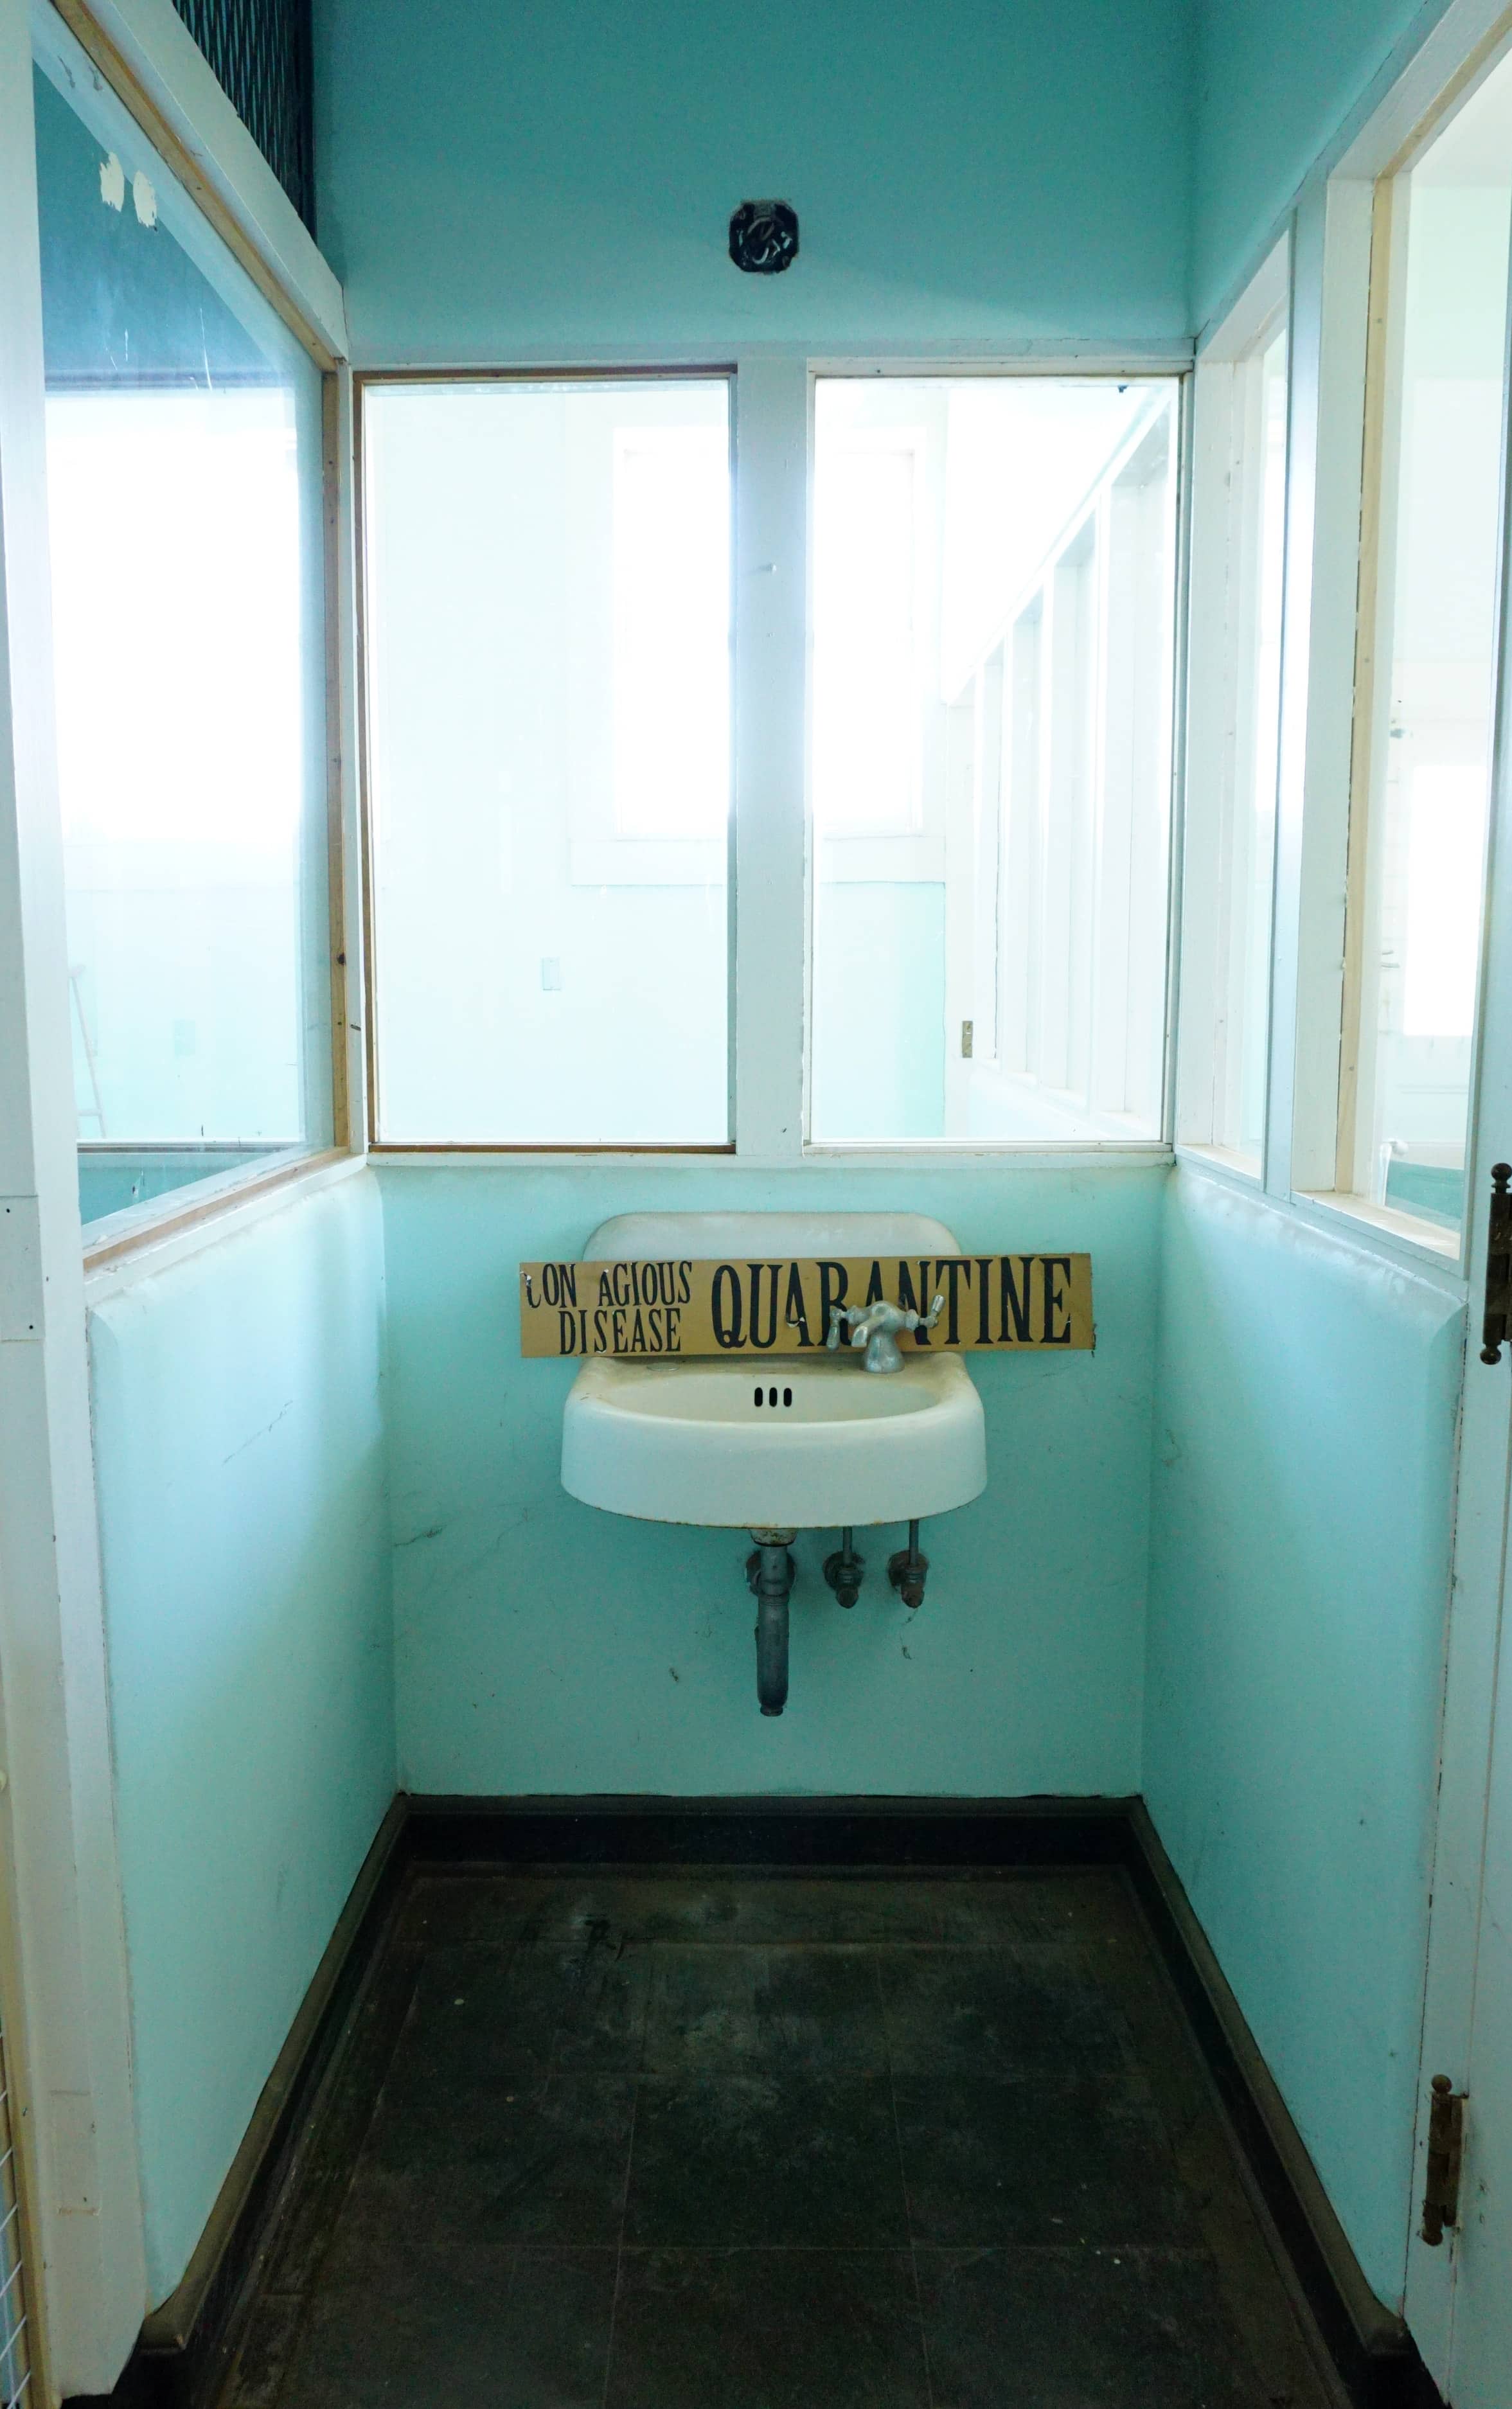 Yellow "contagious disease quarantine" sign on top of a broken white sink 